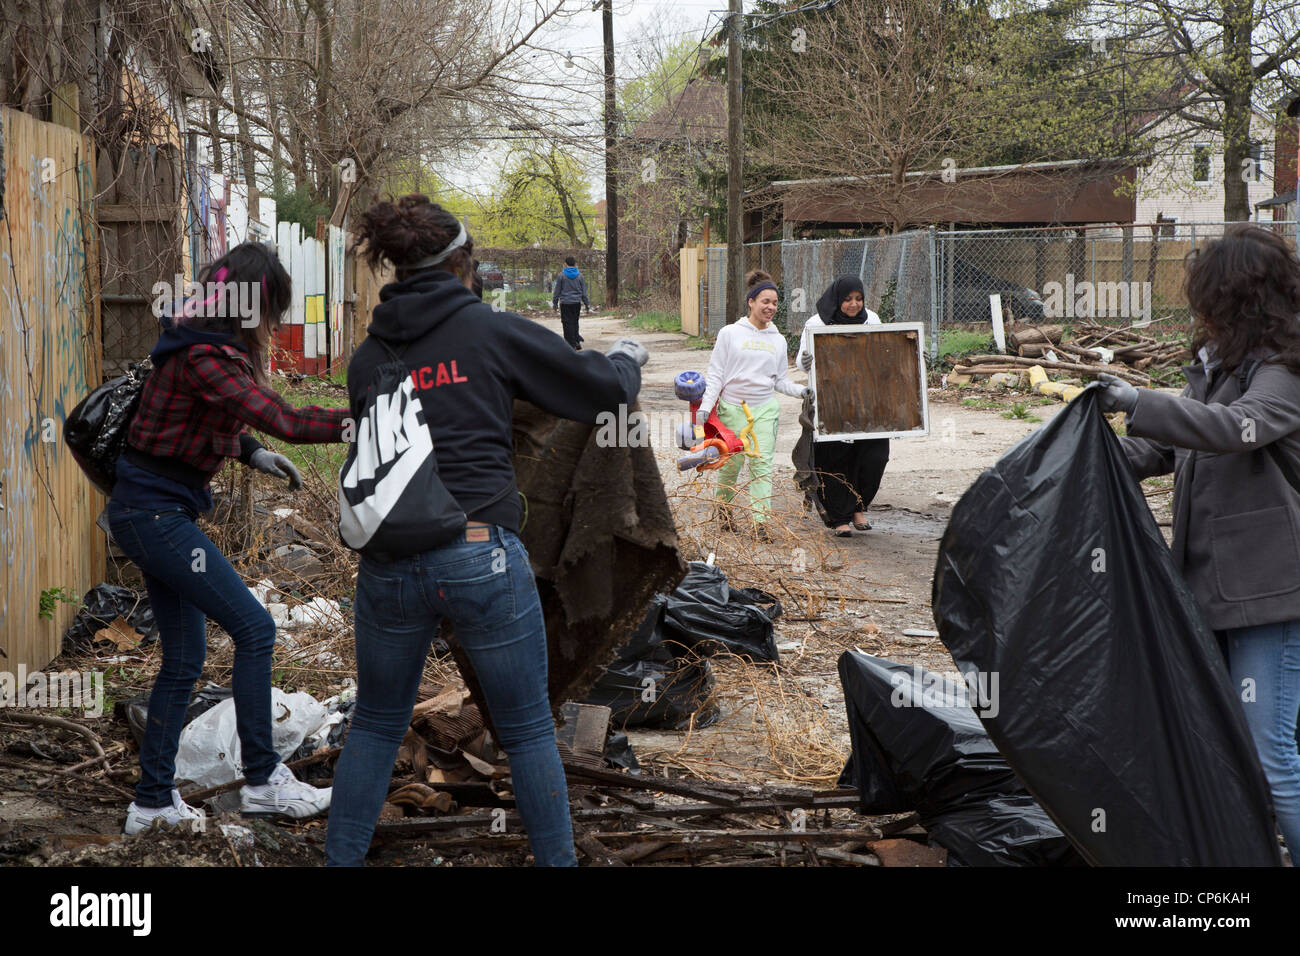 Detroit, Michigan - High school and college student volunteers clean trash from an alley. Stock Photo